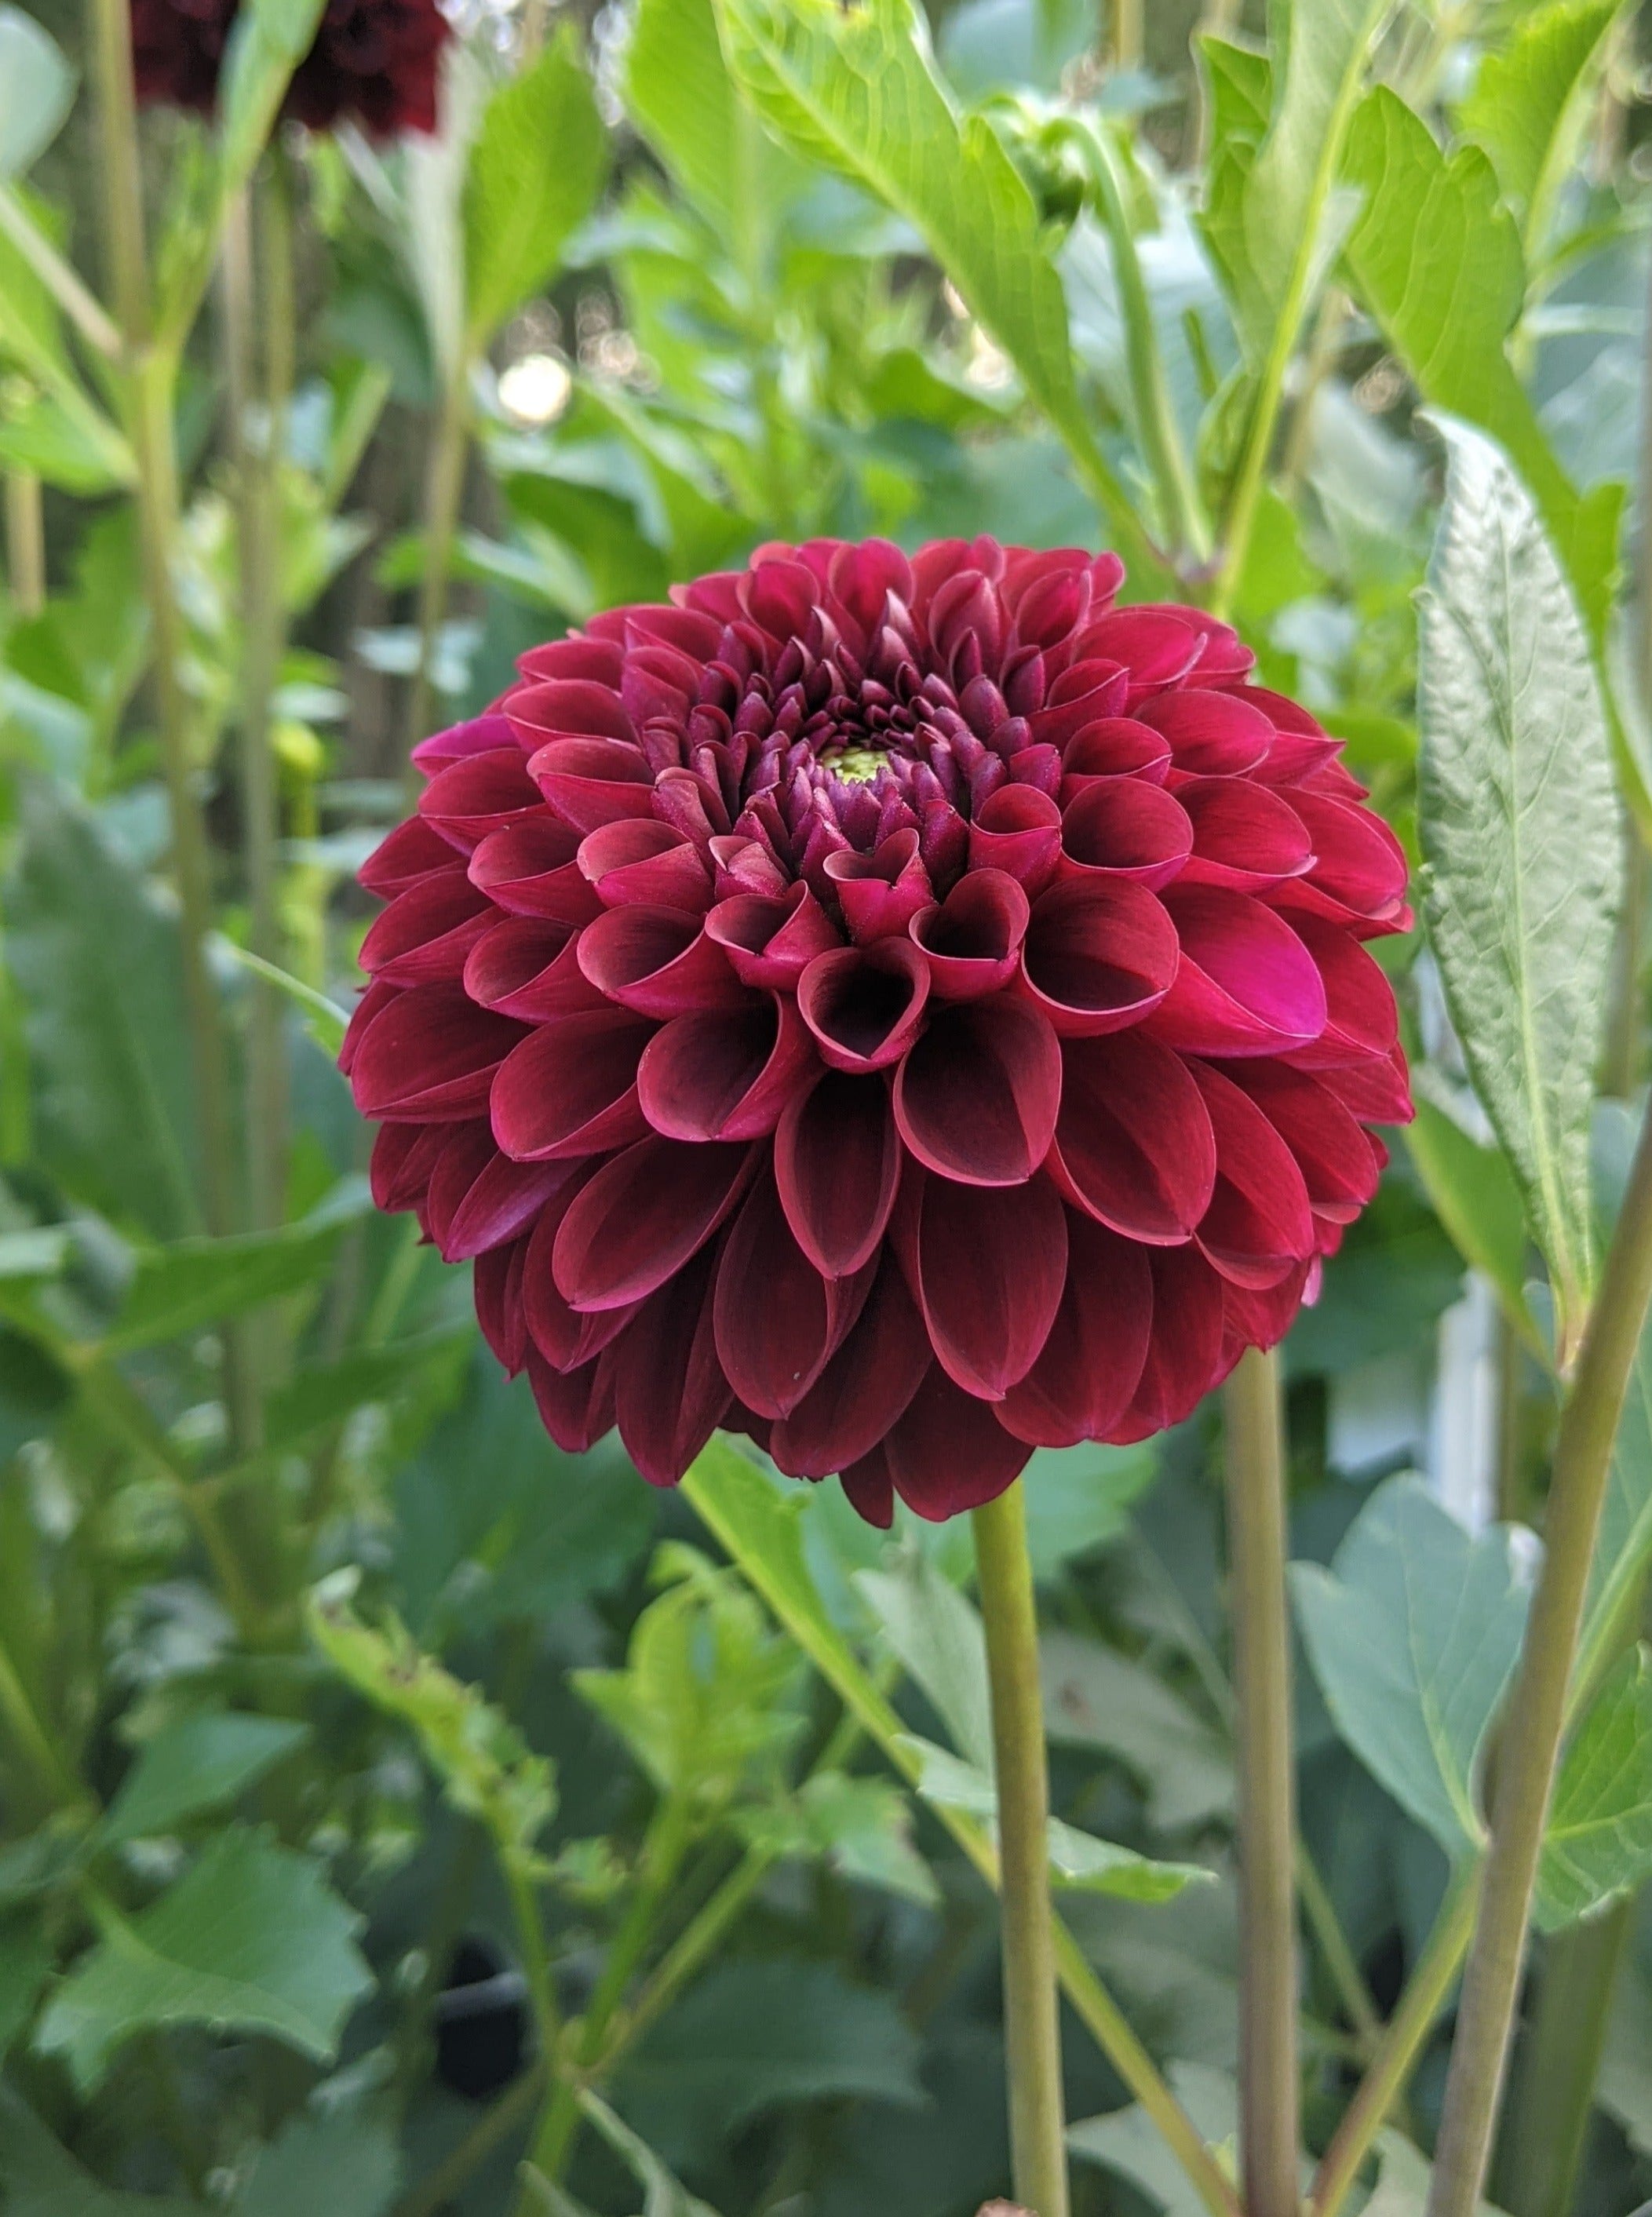 Coseytown Flowers - Leaving these beauties here to make your Monday a  little bit brighter. ❤️ #coseytowndahlias Dahlia: an dahlia seedling named Bermuda  Pink.